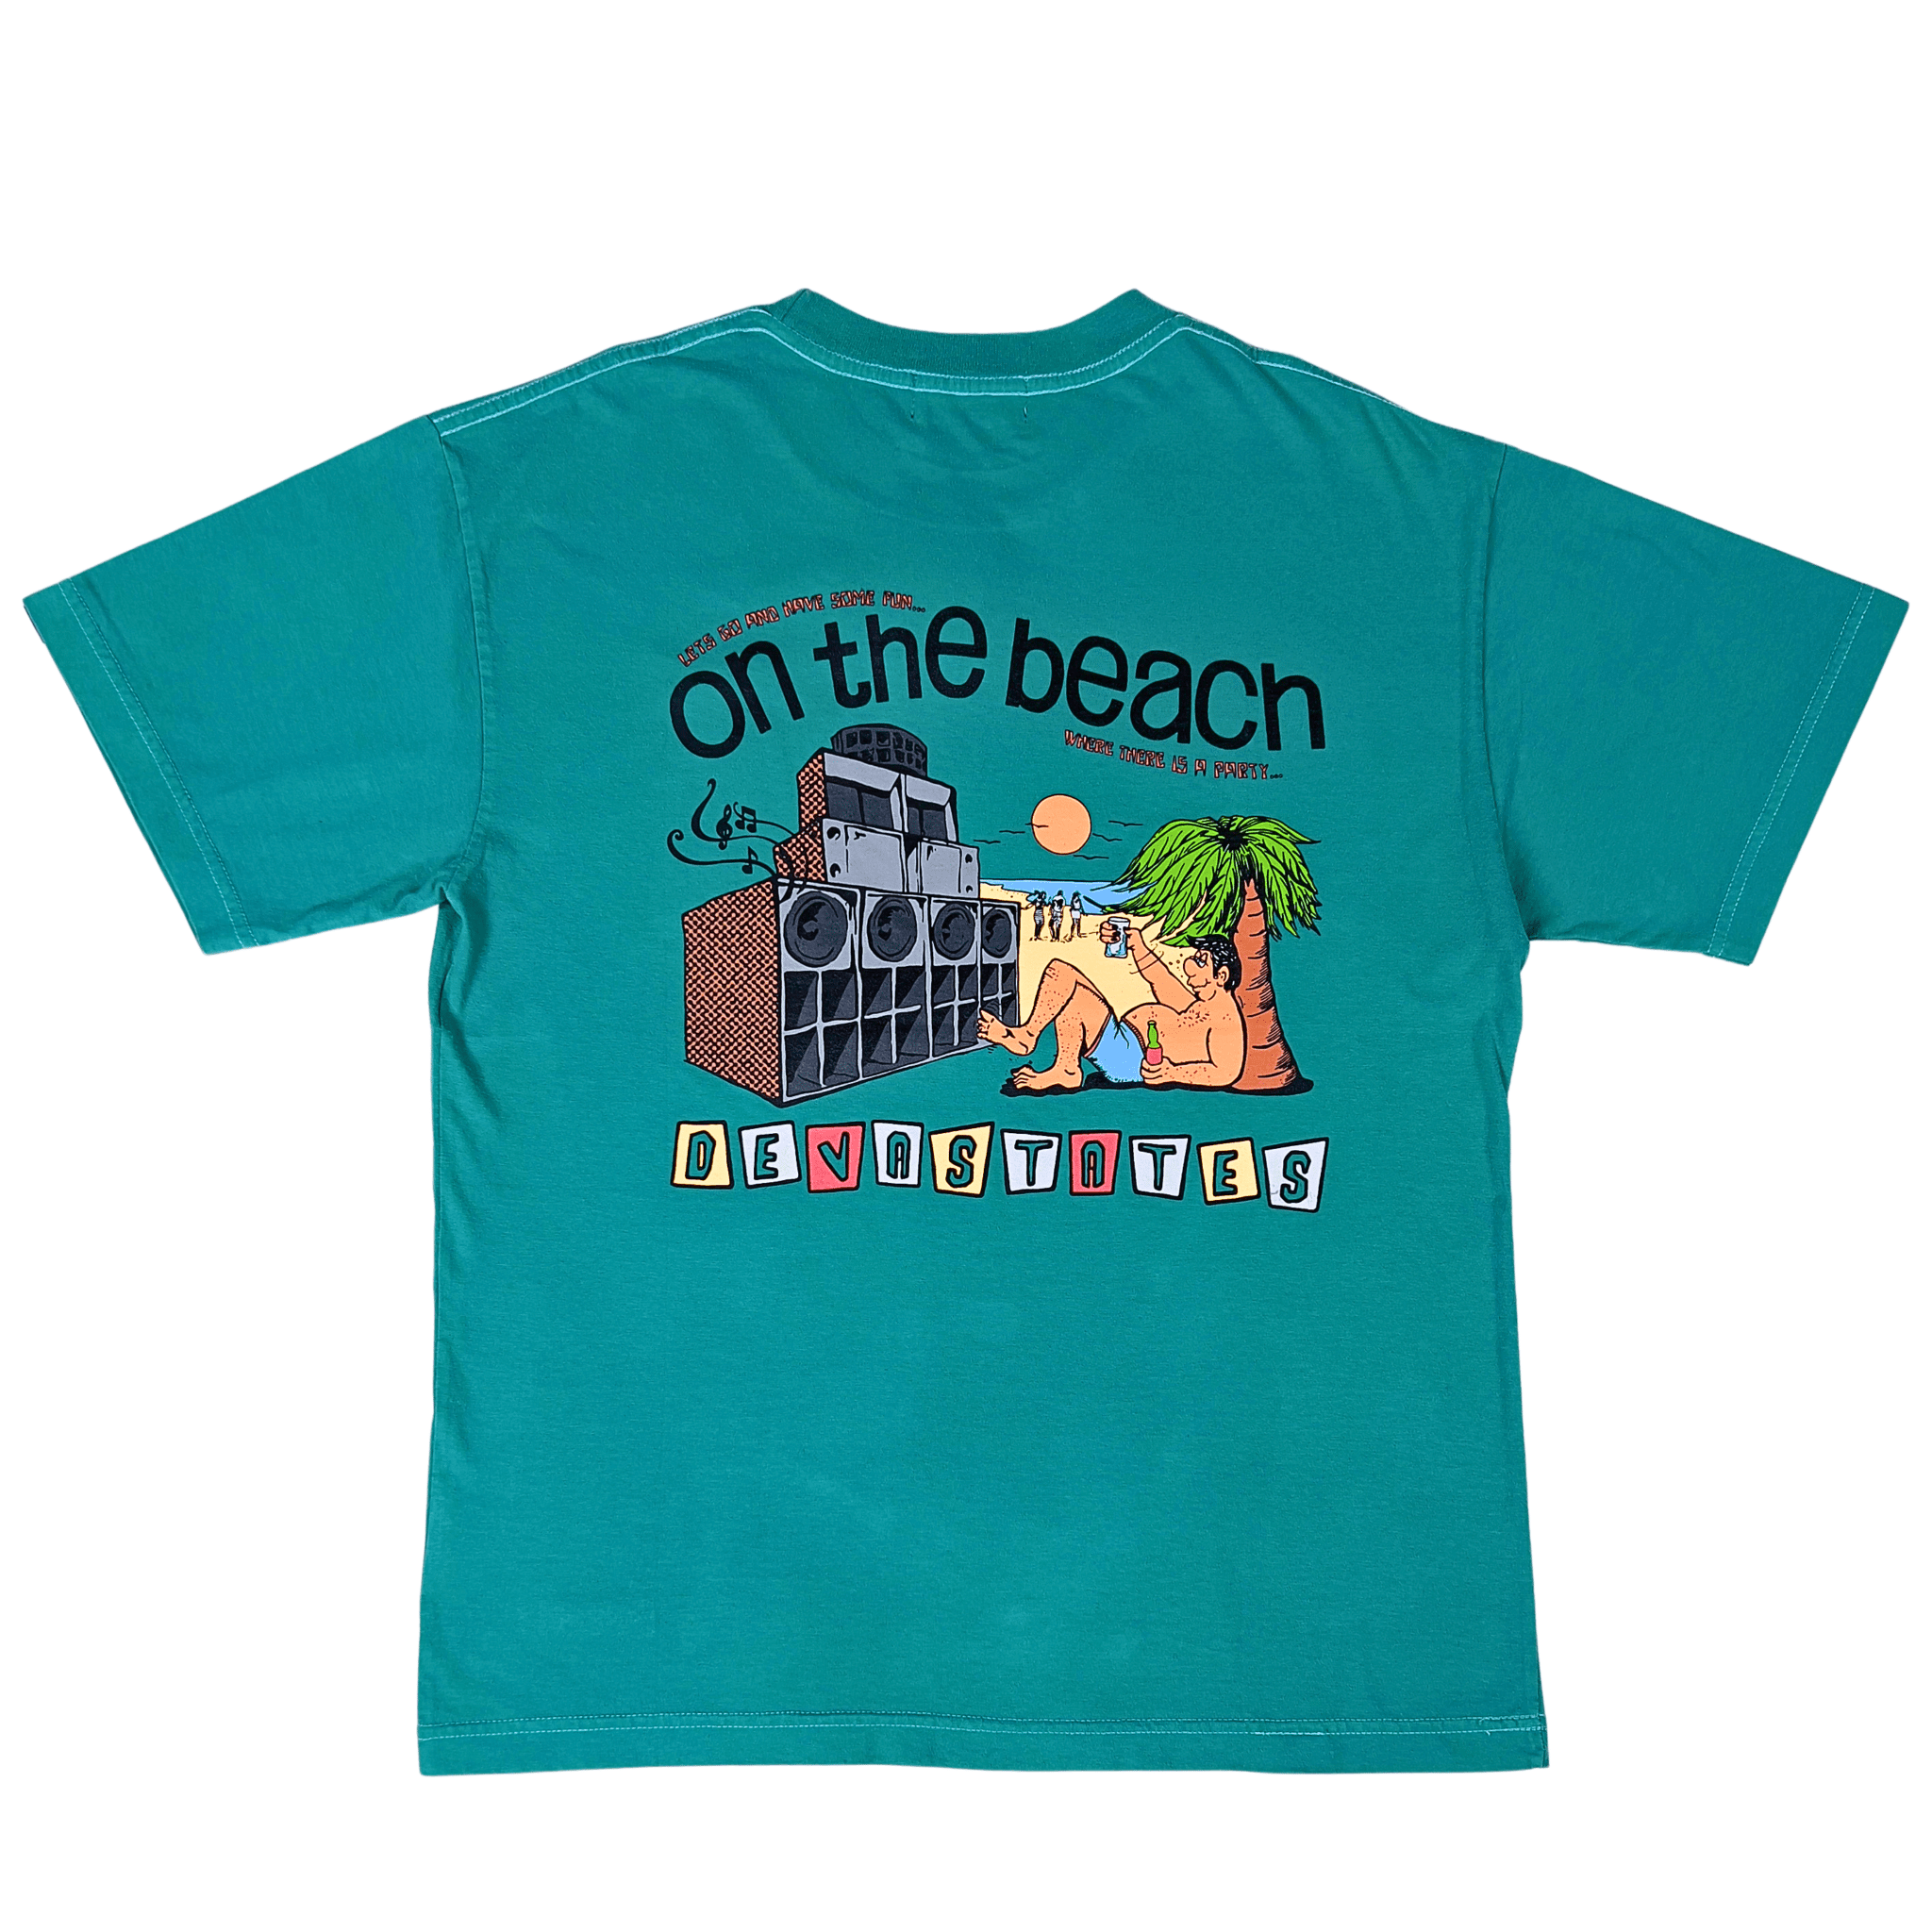 Paragon Tee in tropical teal